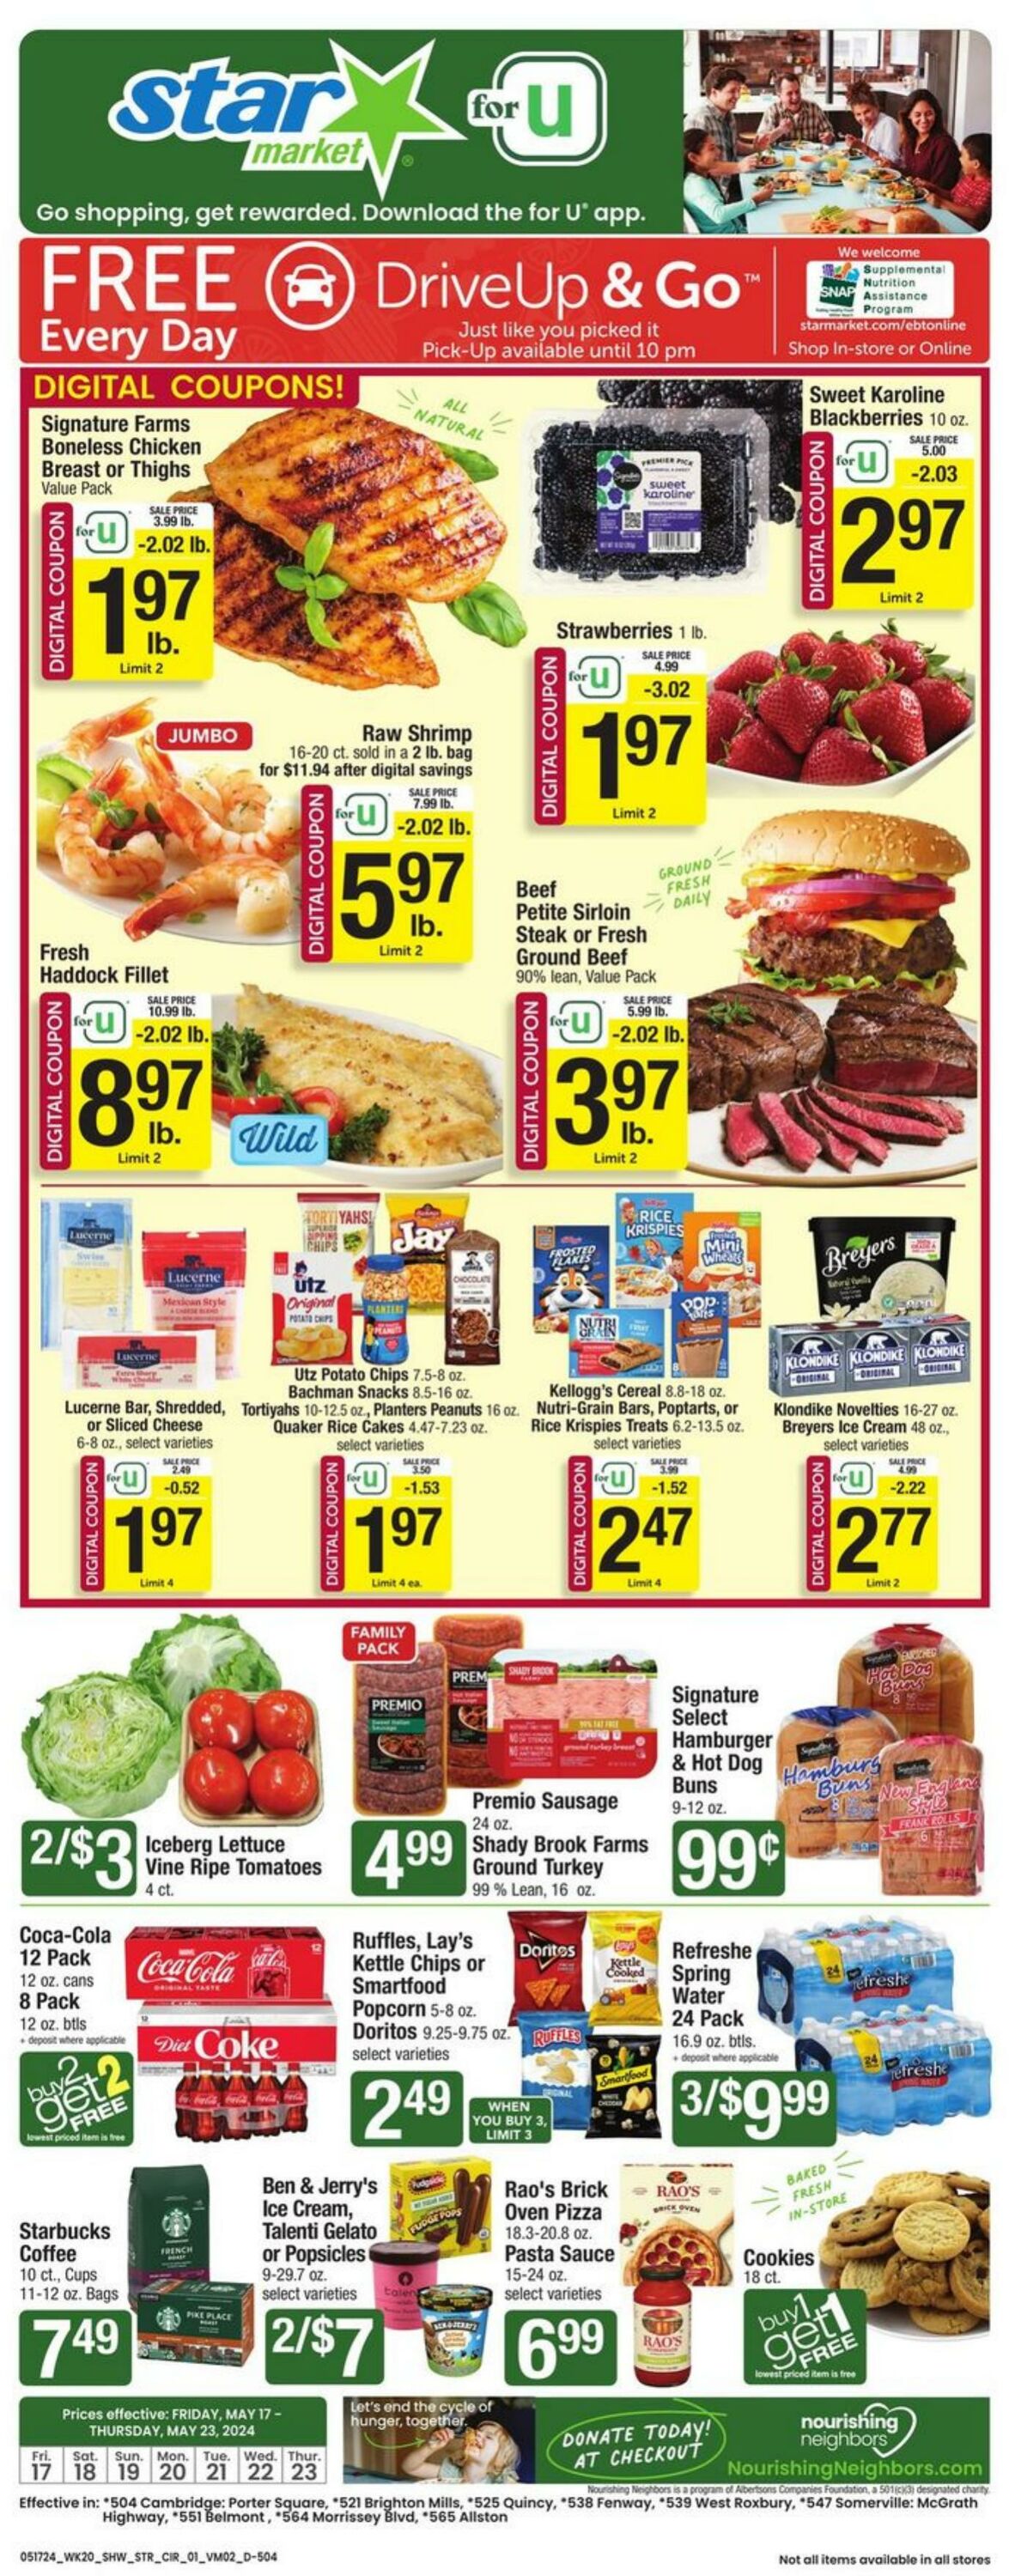 Star Markets Promotional weekly ads